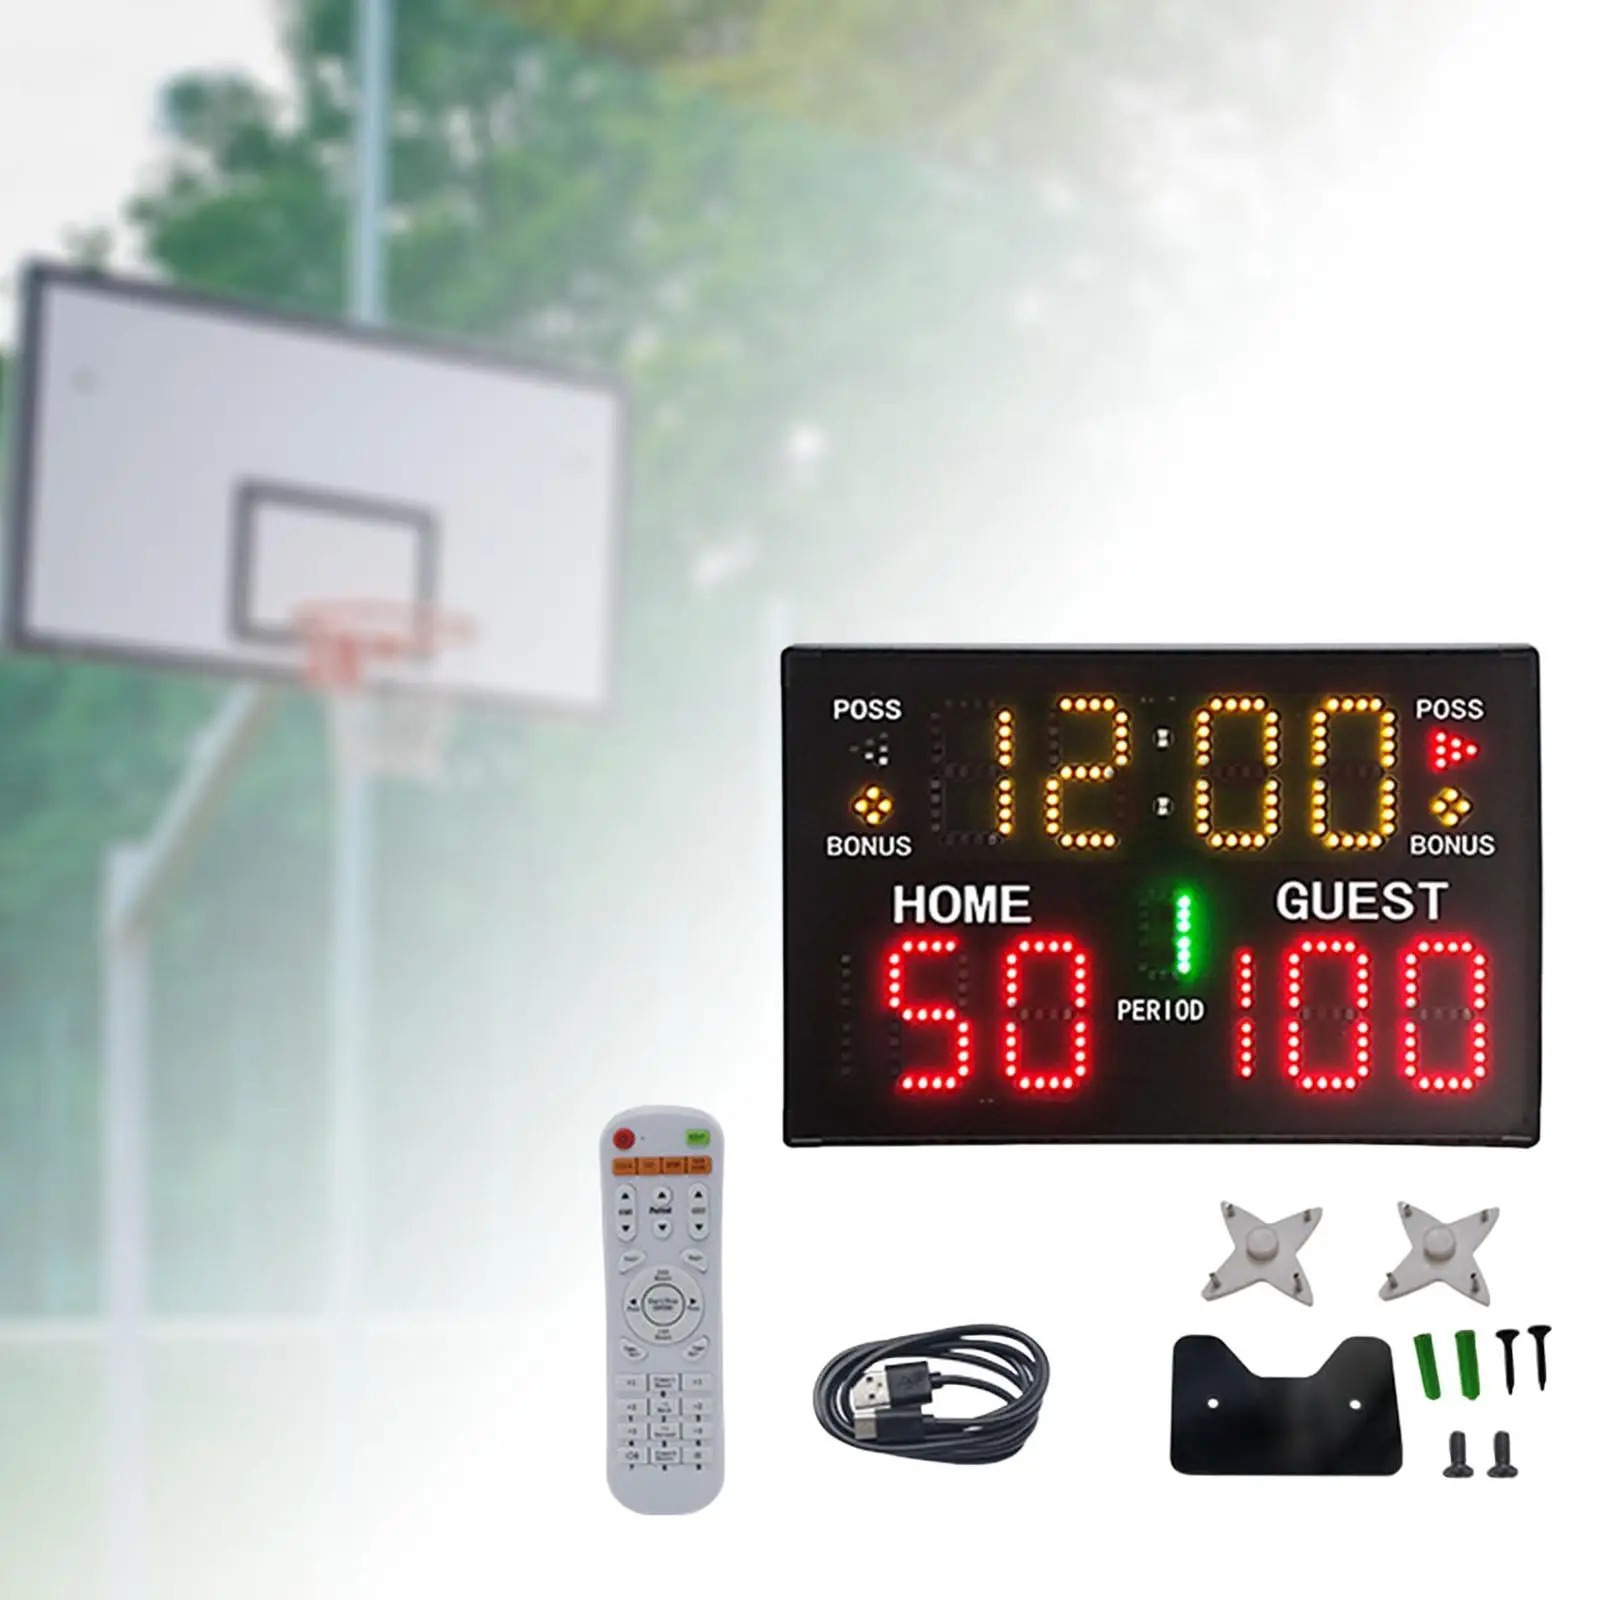 Tabletop Digital Scoreboard Battery Operated Portable Wall Mounted Professional Electronic Scoreboard for Tennis Indoor Boxing